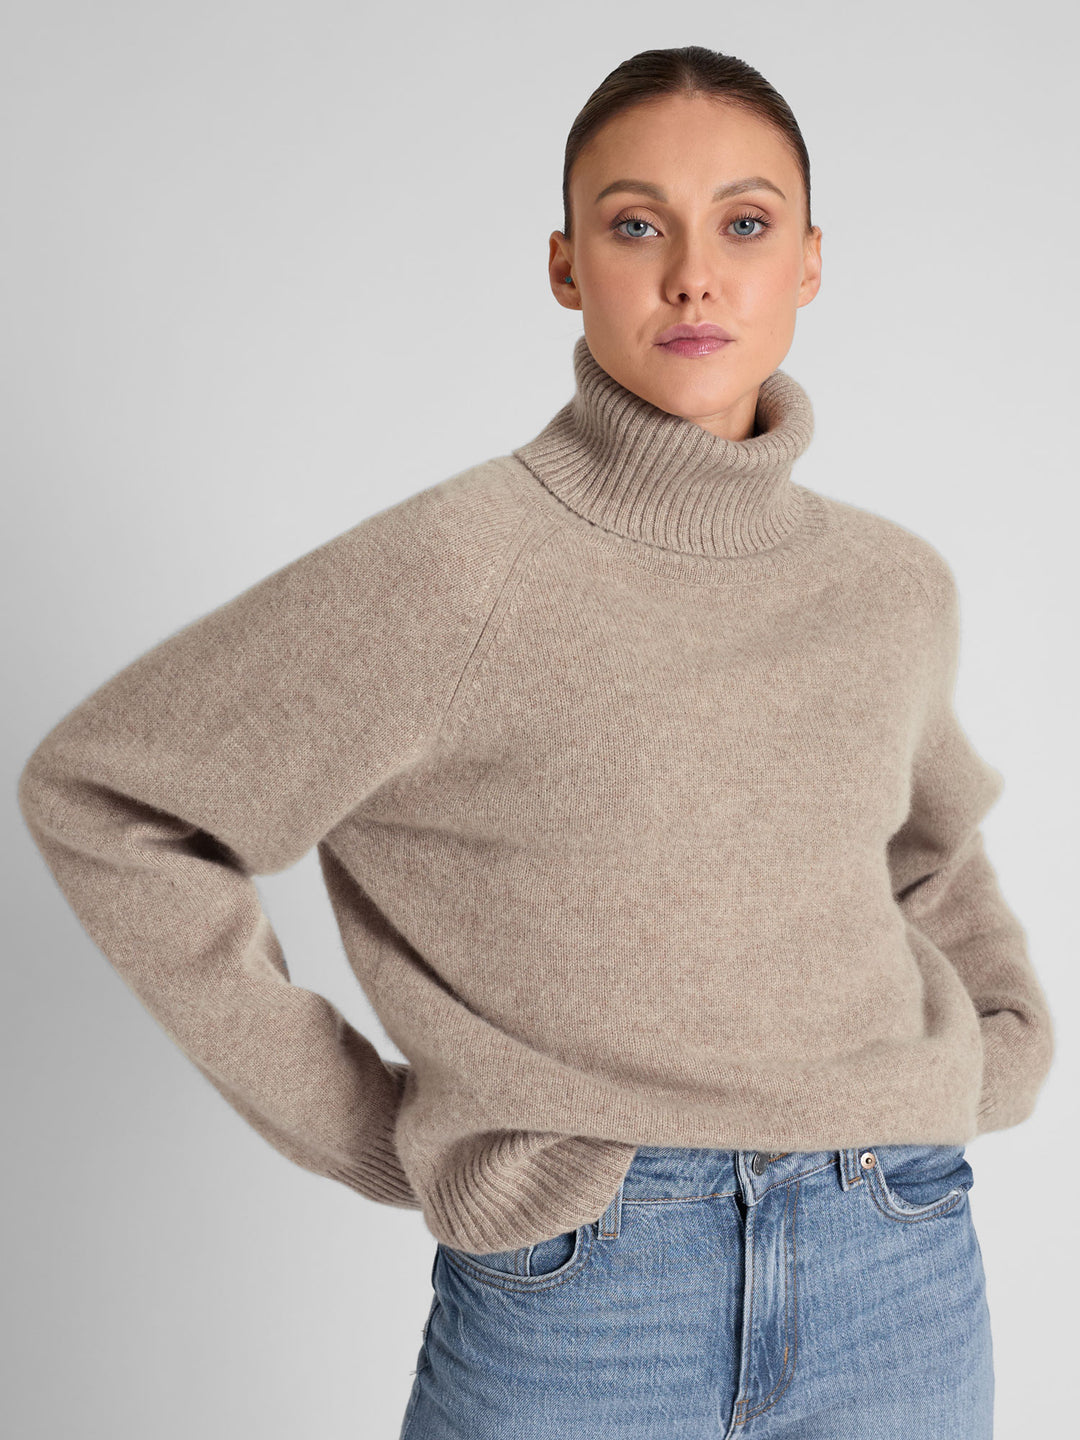 Cashmere sweater "Milano" in 100% pure cashmere. Scandinavian design by Kashmina. Color: Toast.